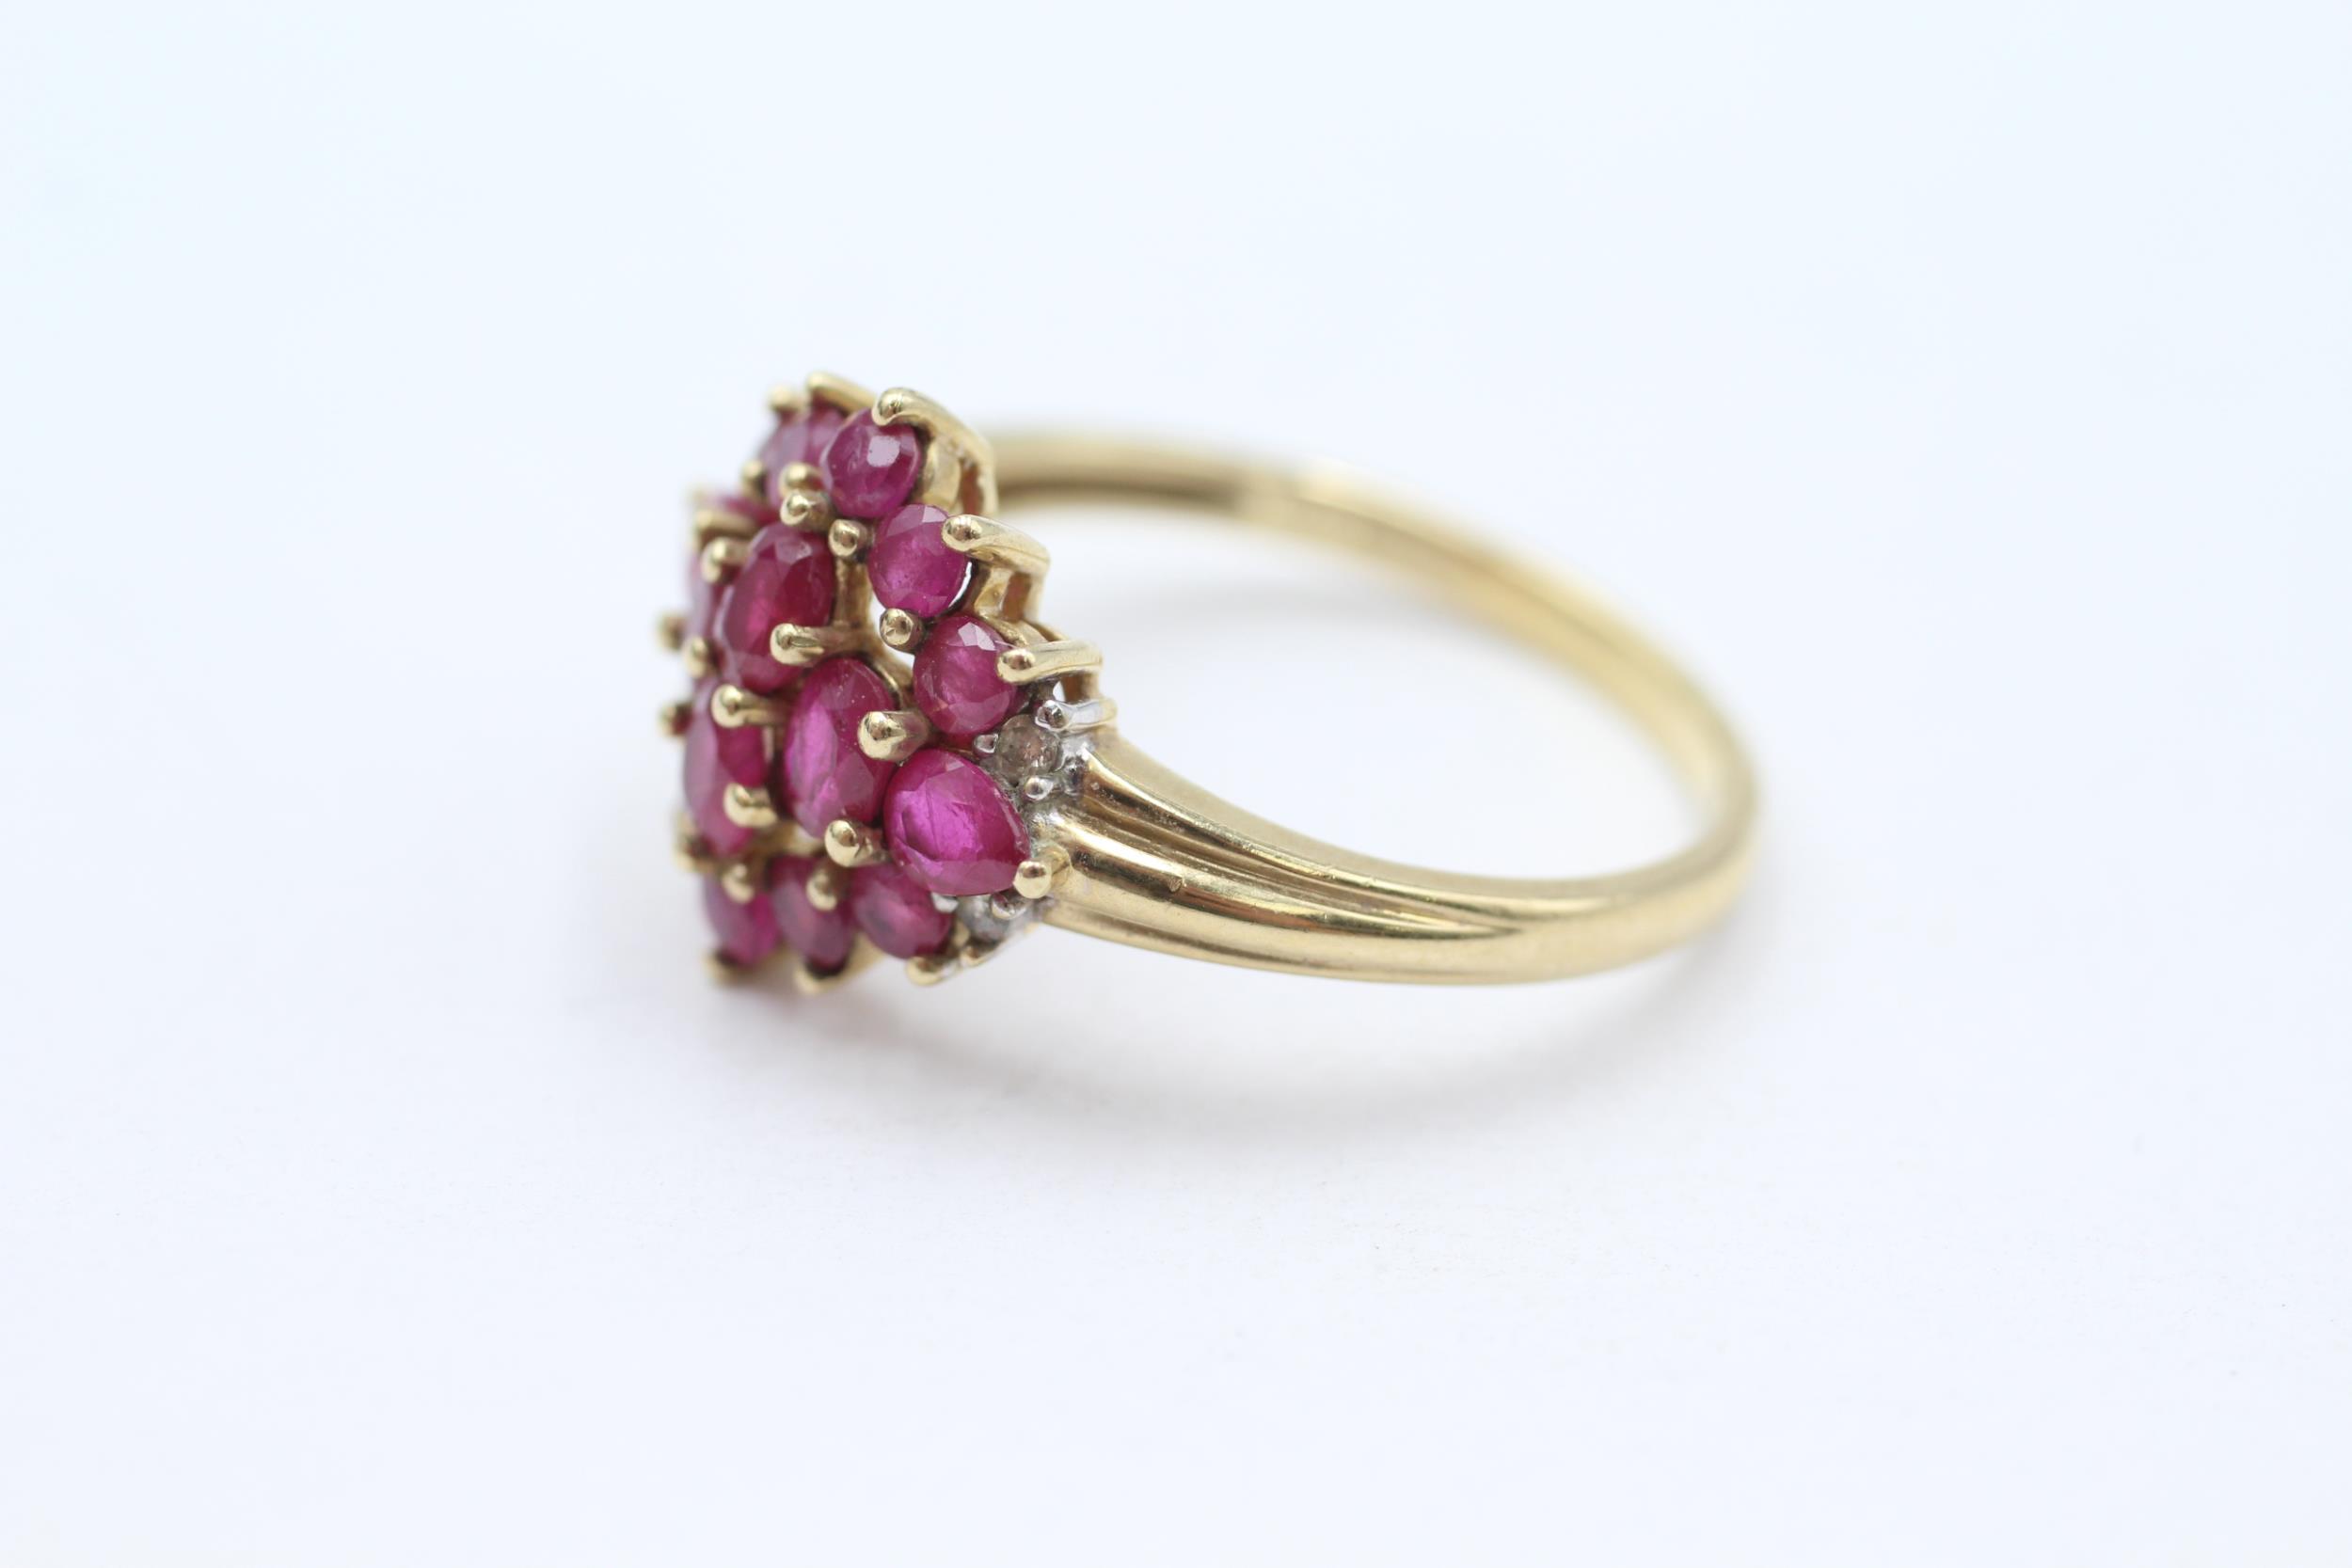 9ct gold ruby & diamond dress ring Size S - 3.2 g - Image 3 of 4